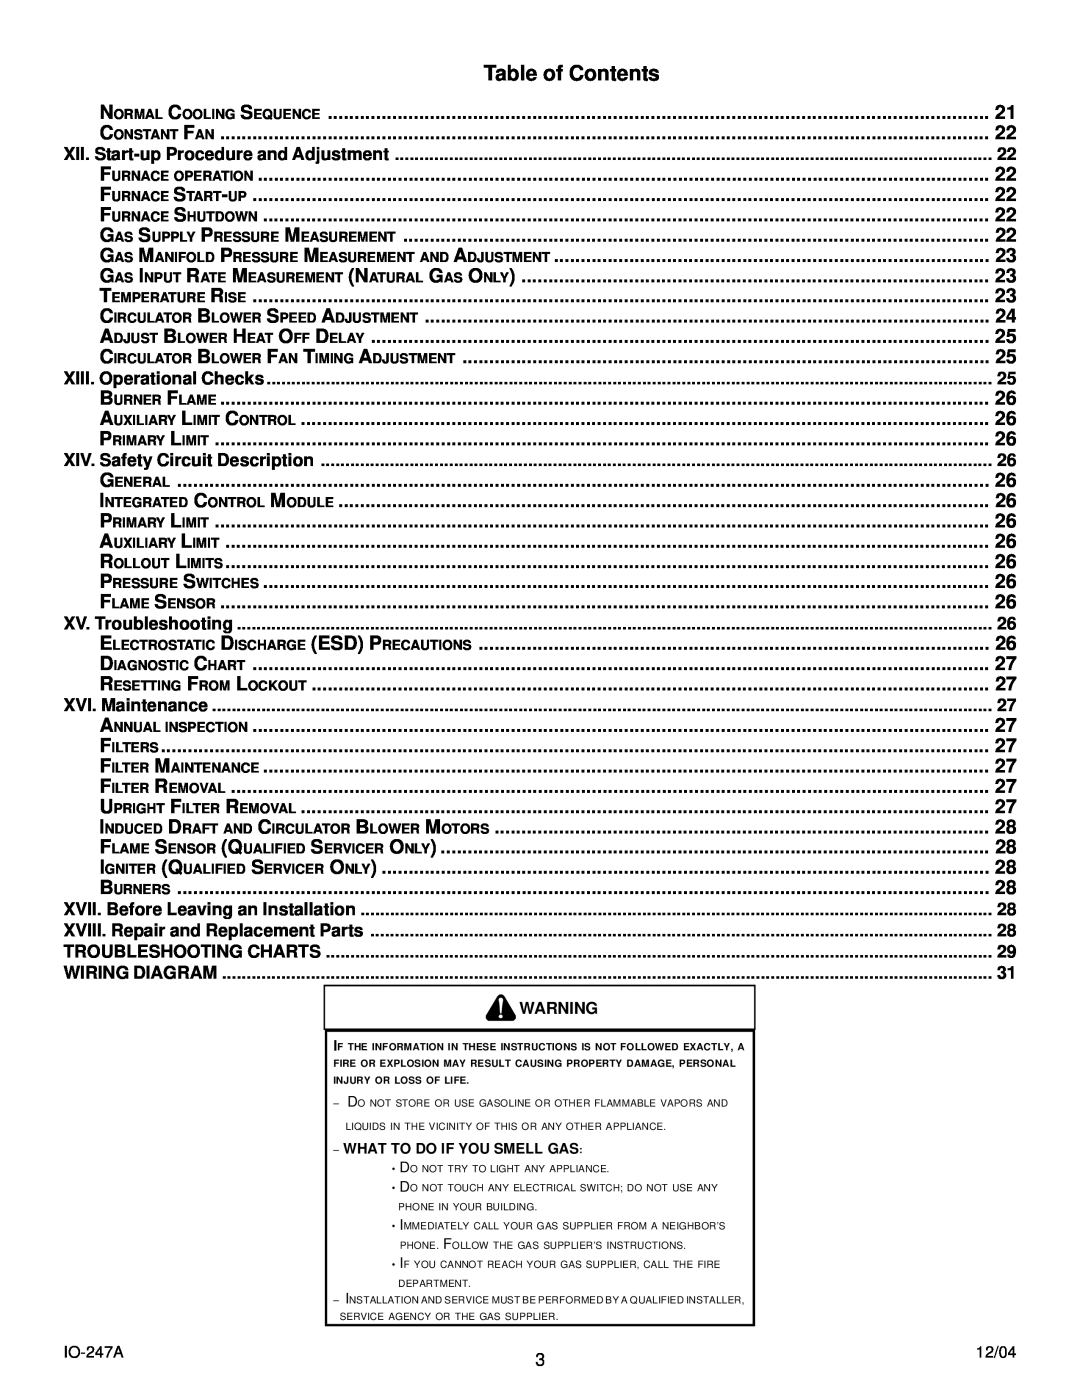 Goodman Mfg AMV8 Table of Contents, XII. Start-up Procedure and Adjustment, XIII. Operational Checks, XV. Troubleshooting 